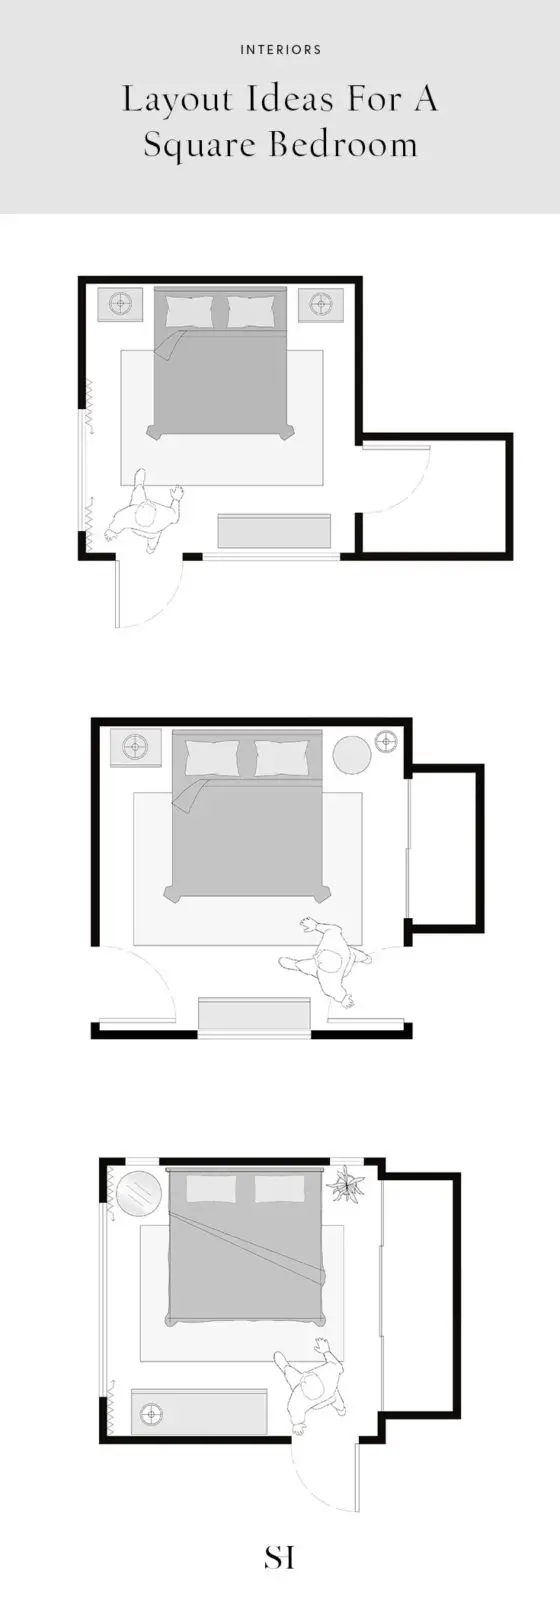 Floor Plan Layout Ideas For A Square 12 X 12 Bedroom By The Savvy Heart Interior Design Studio 560x1600 